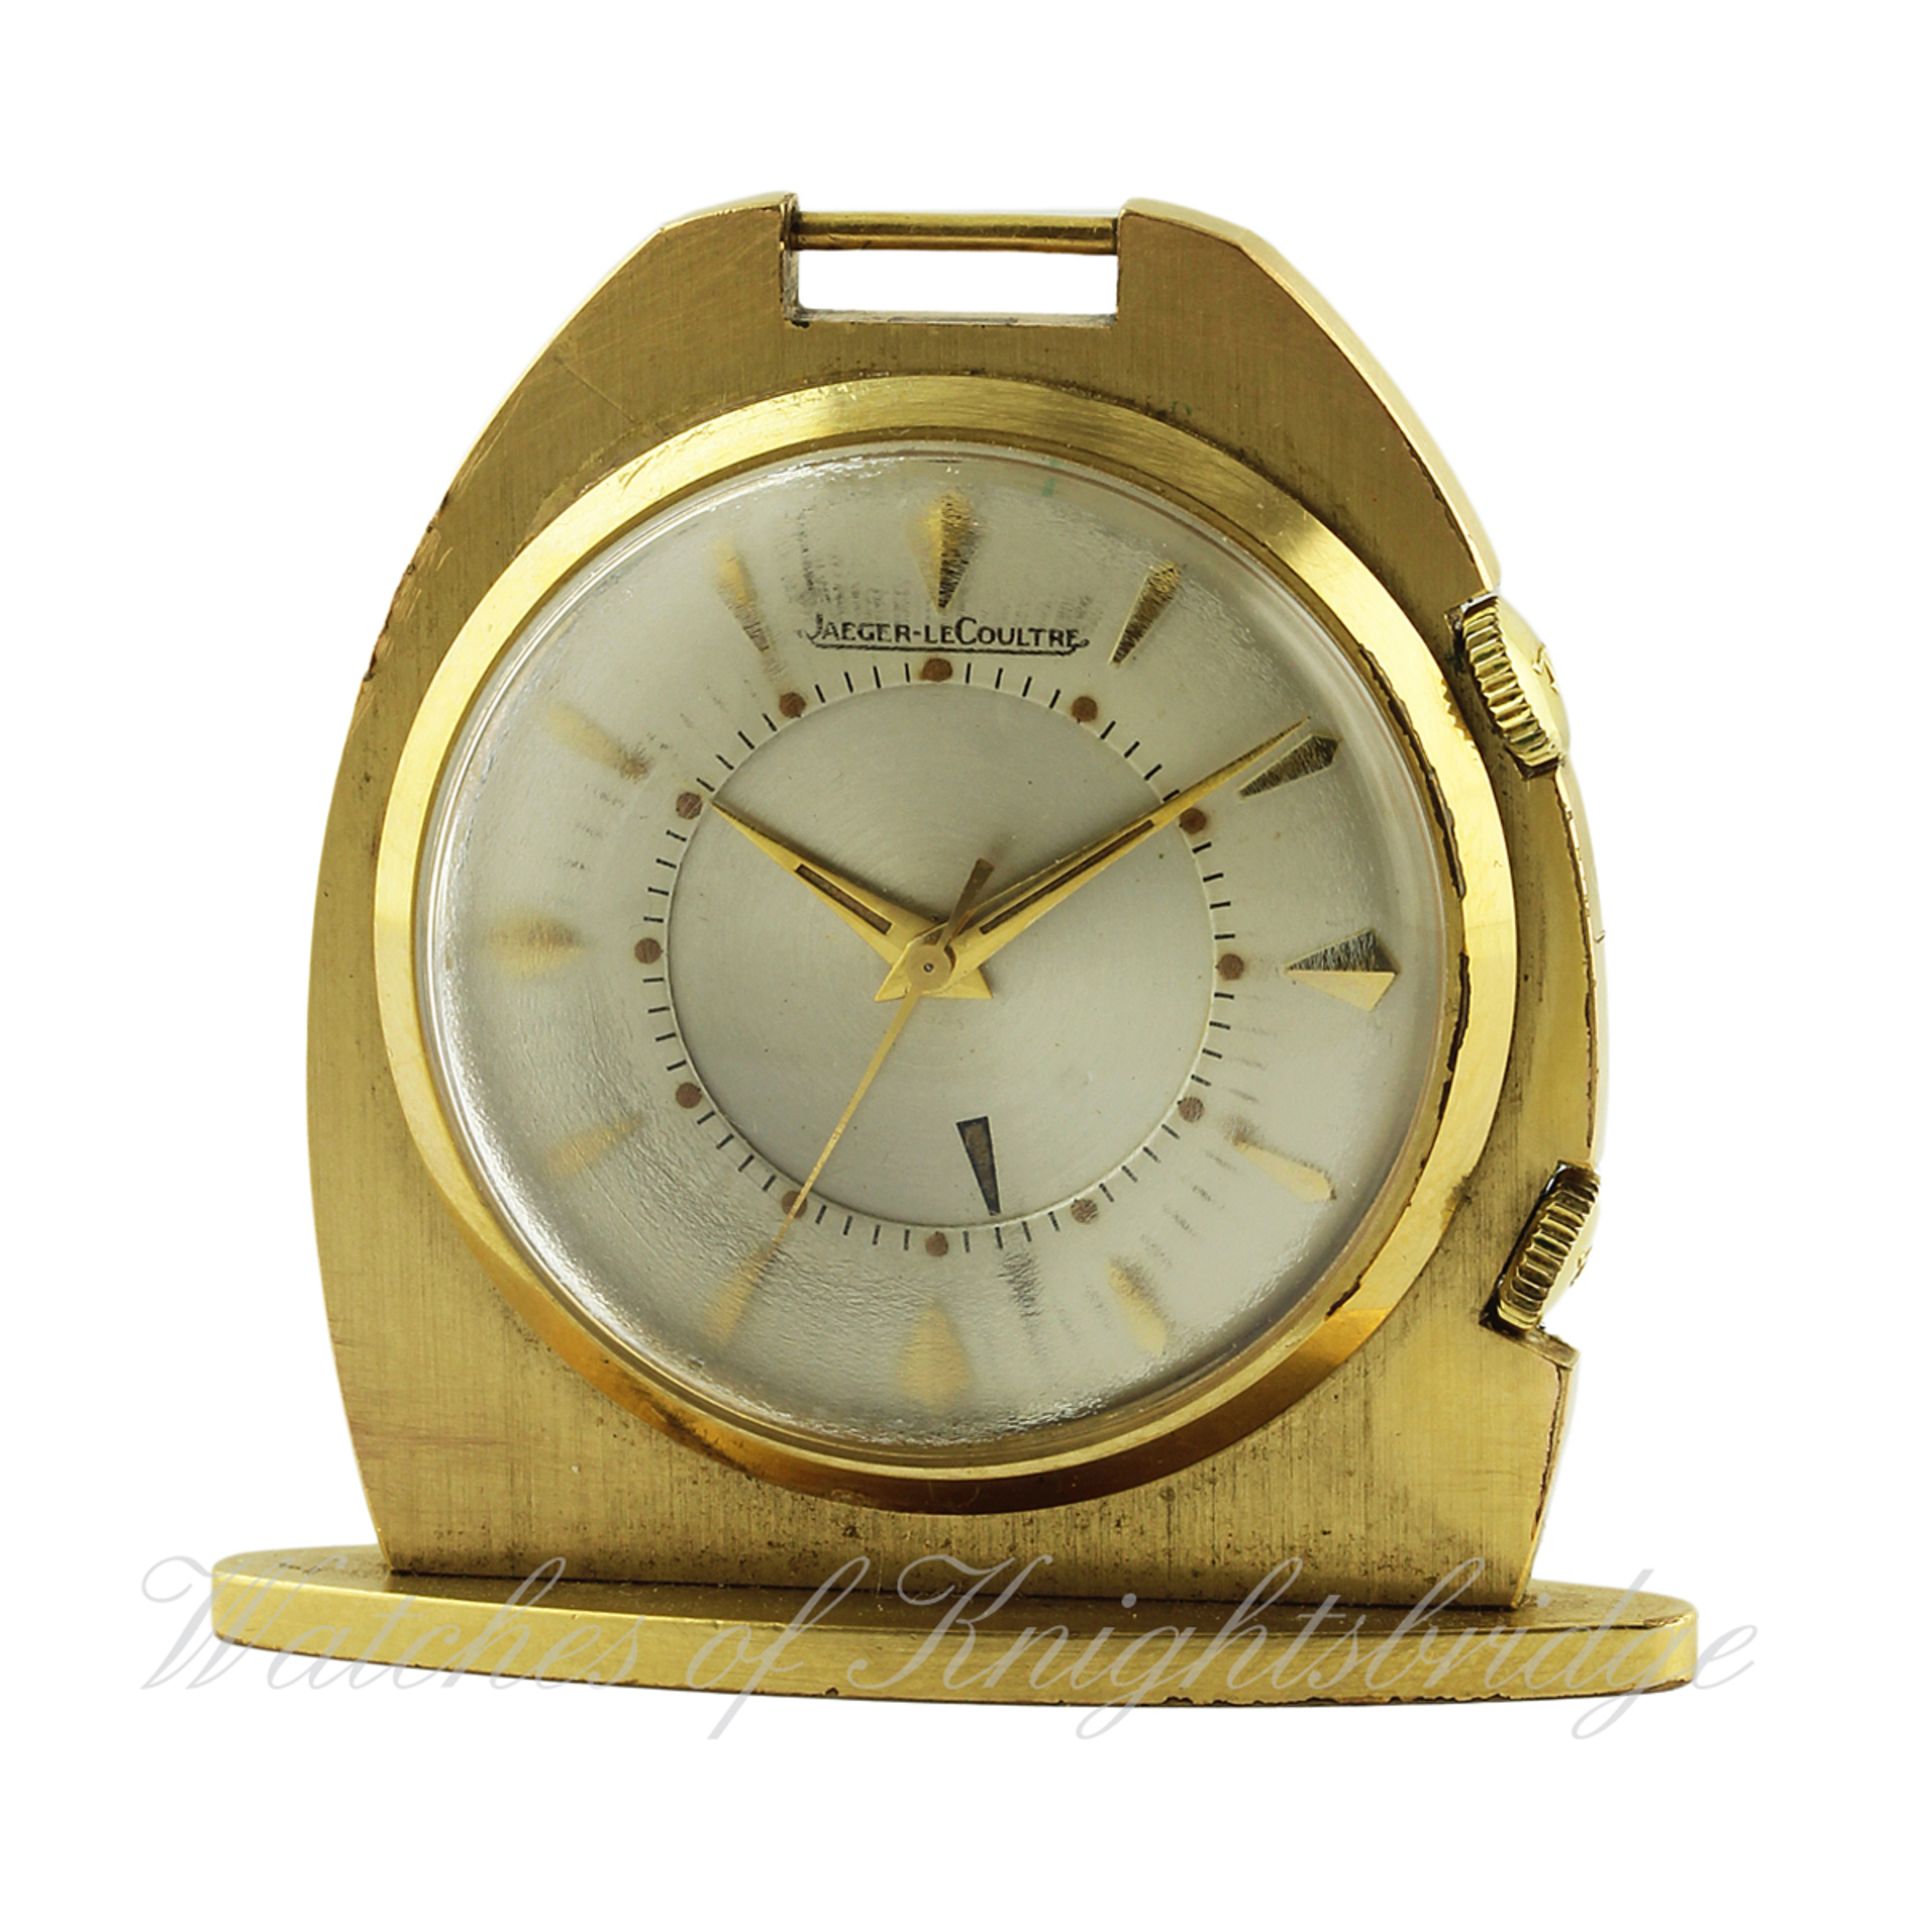 A GILT METAL JAEGER LECOULTRE ALARM TRAVEL / POCKET WATCH CIRCA 1970s D: Two piece champagne dial